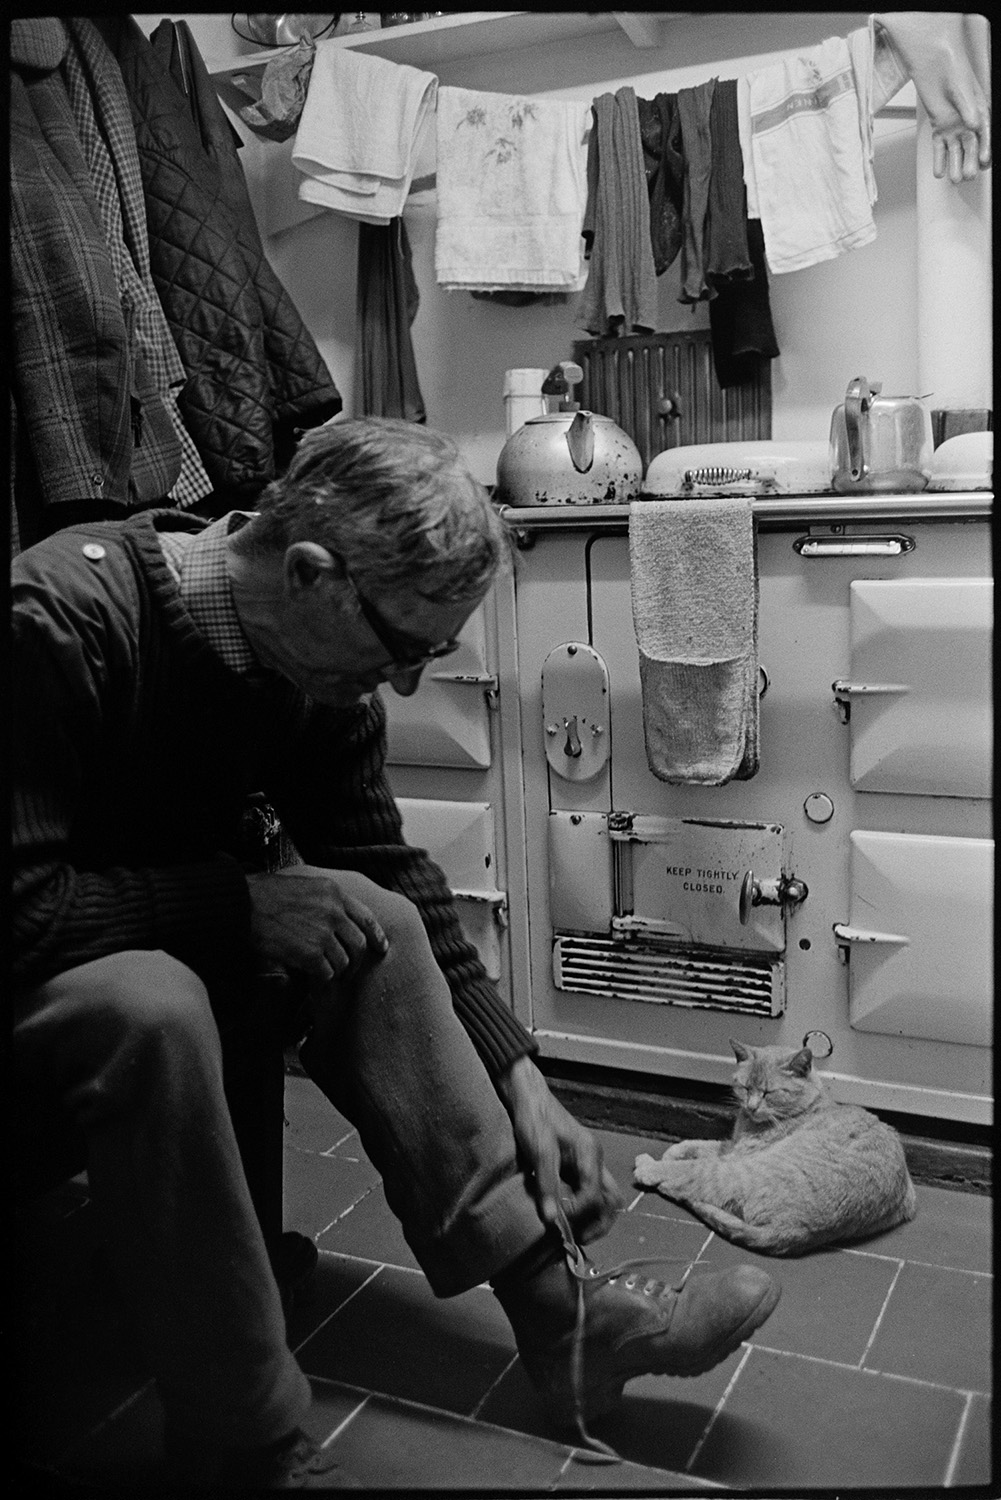 Man leaning on stove, kettle, teapot, cloths drying, mantelpiece. 
[A man sat on a chair untying his boot laces, by an Aga at Exmoor Farm. A kettle and pair of oven gloves are on the stove and a cat is sat in front of the Aga. Coats are hung up on the wall in the background.]